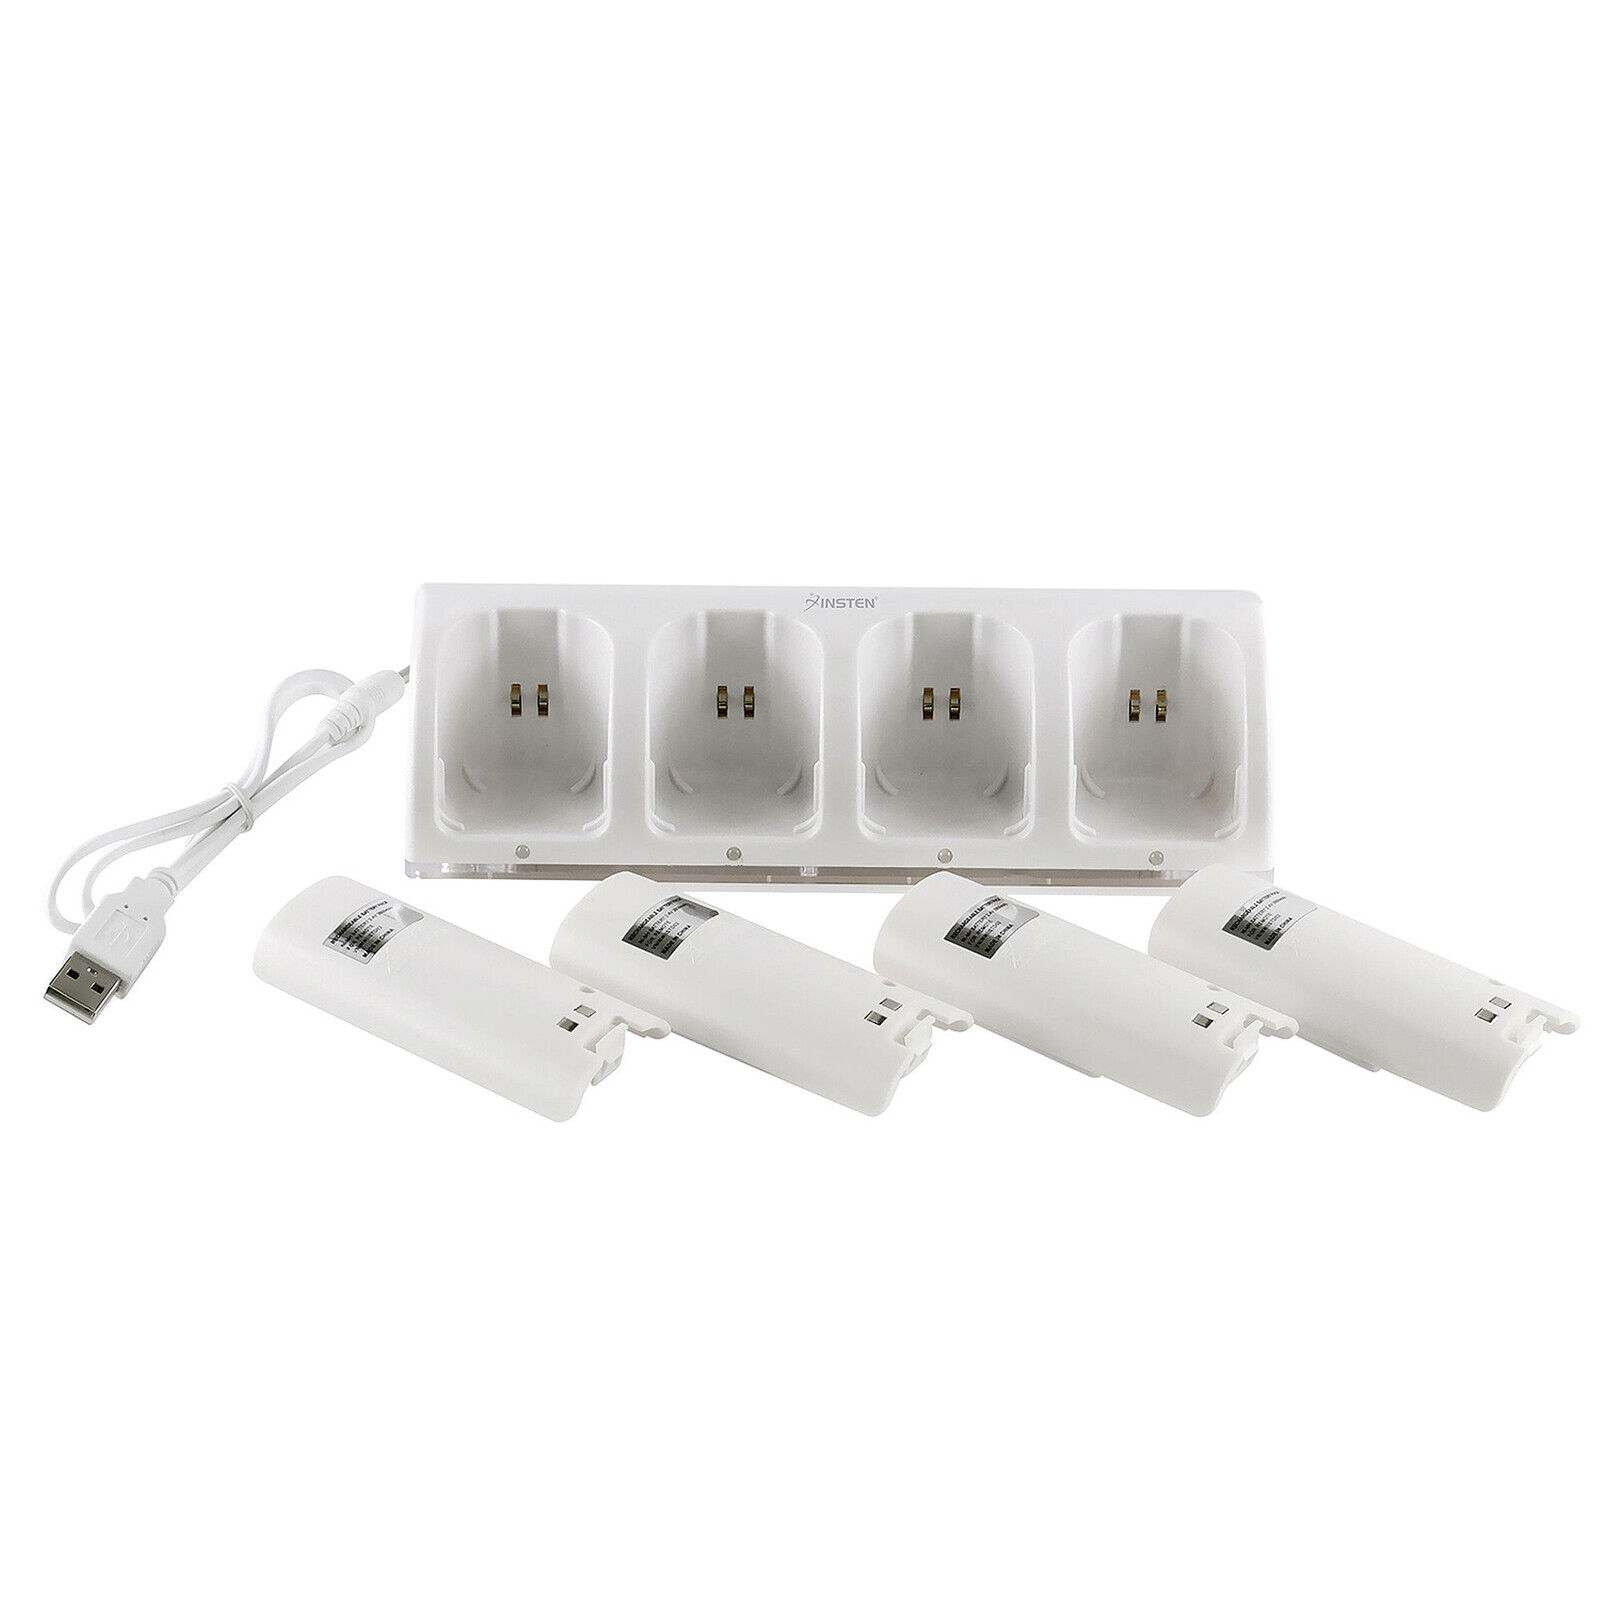 4x Rechargeable Batteries Pack + Charger Dock For Nintendo Wii Remote  Controller 